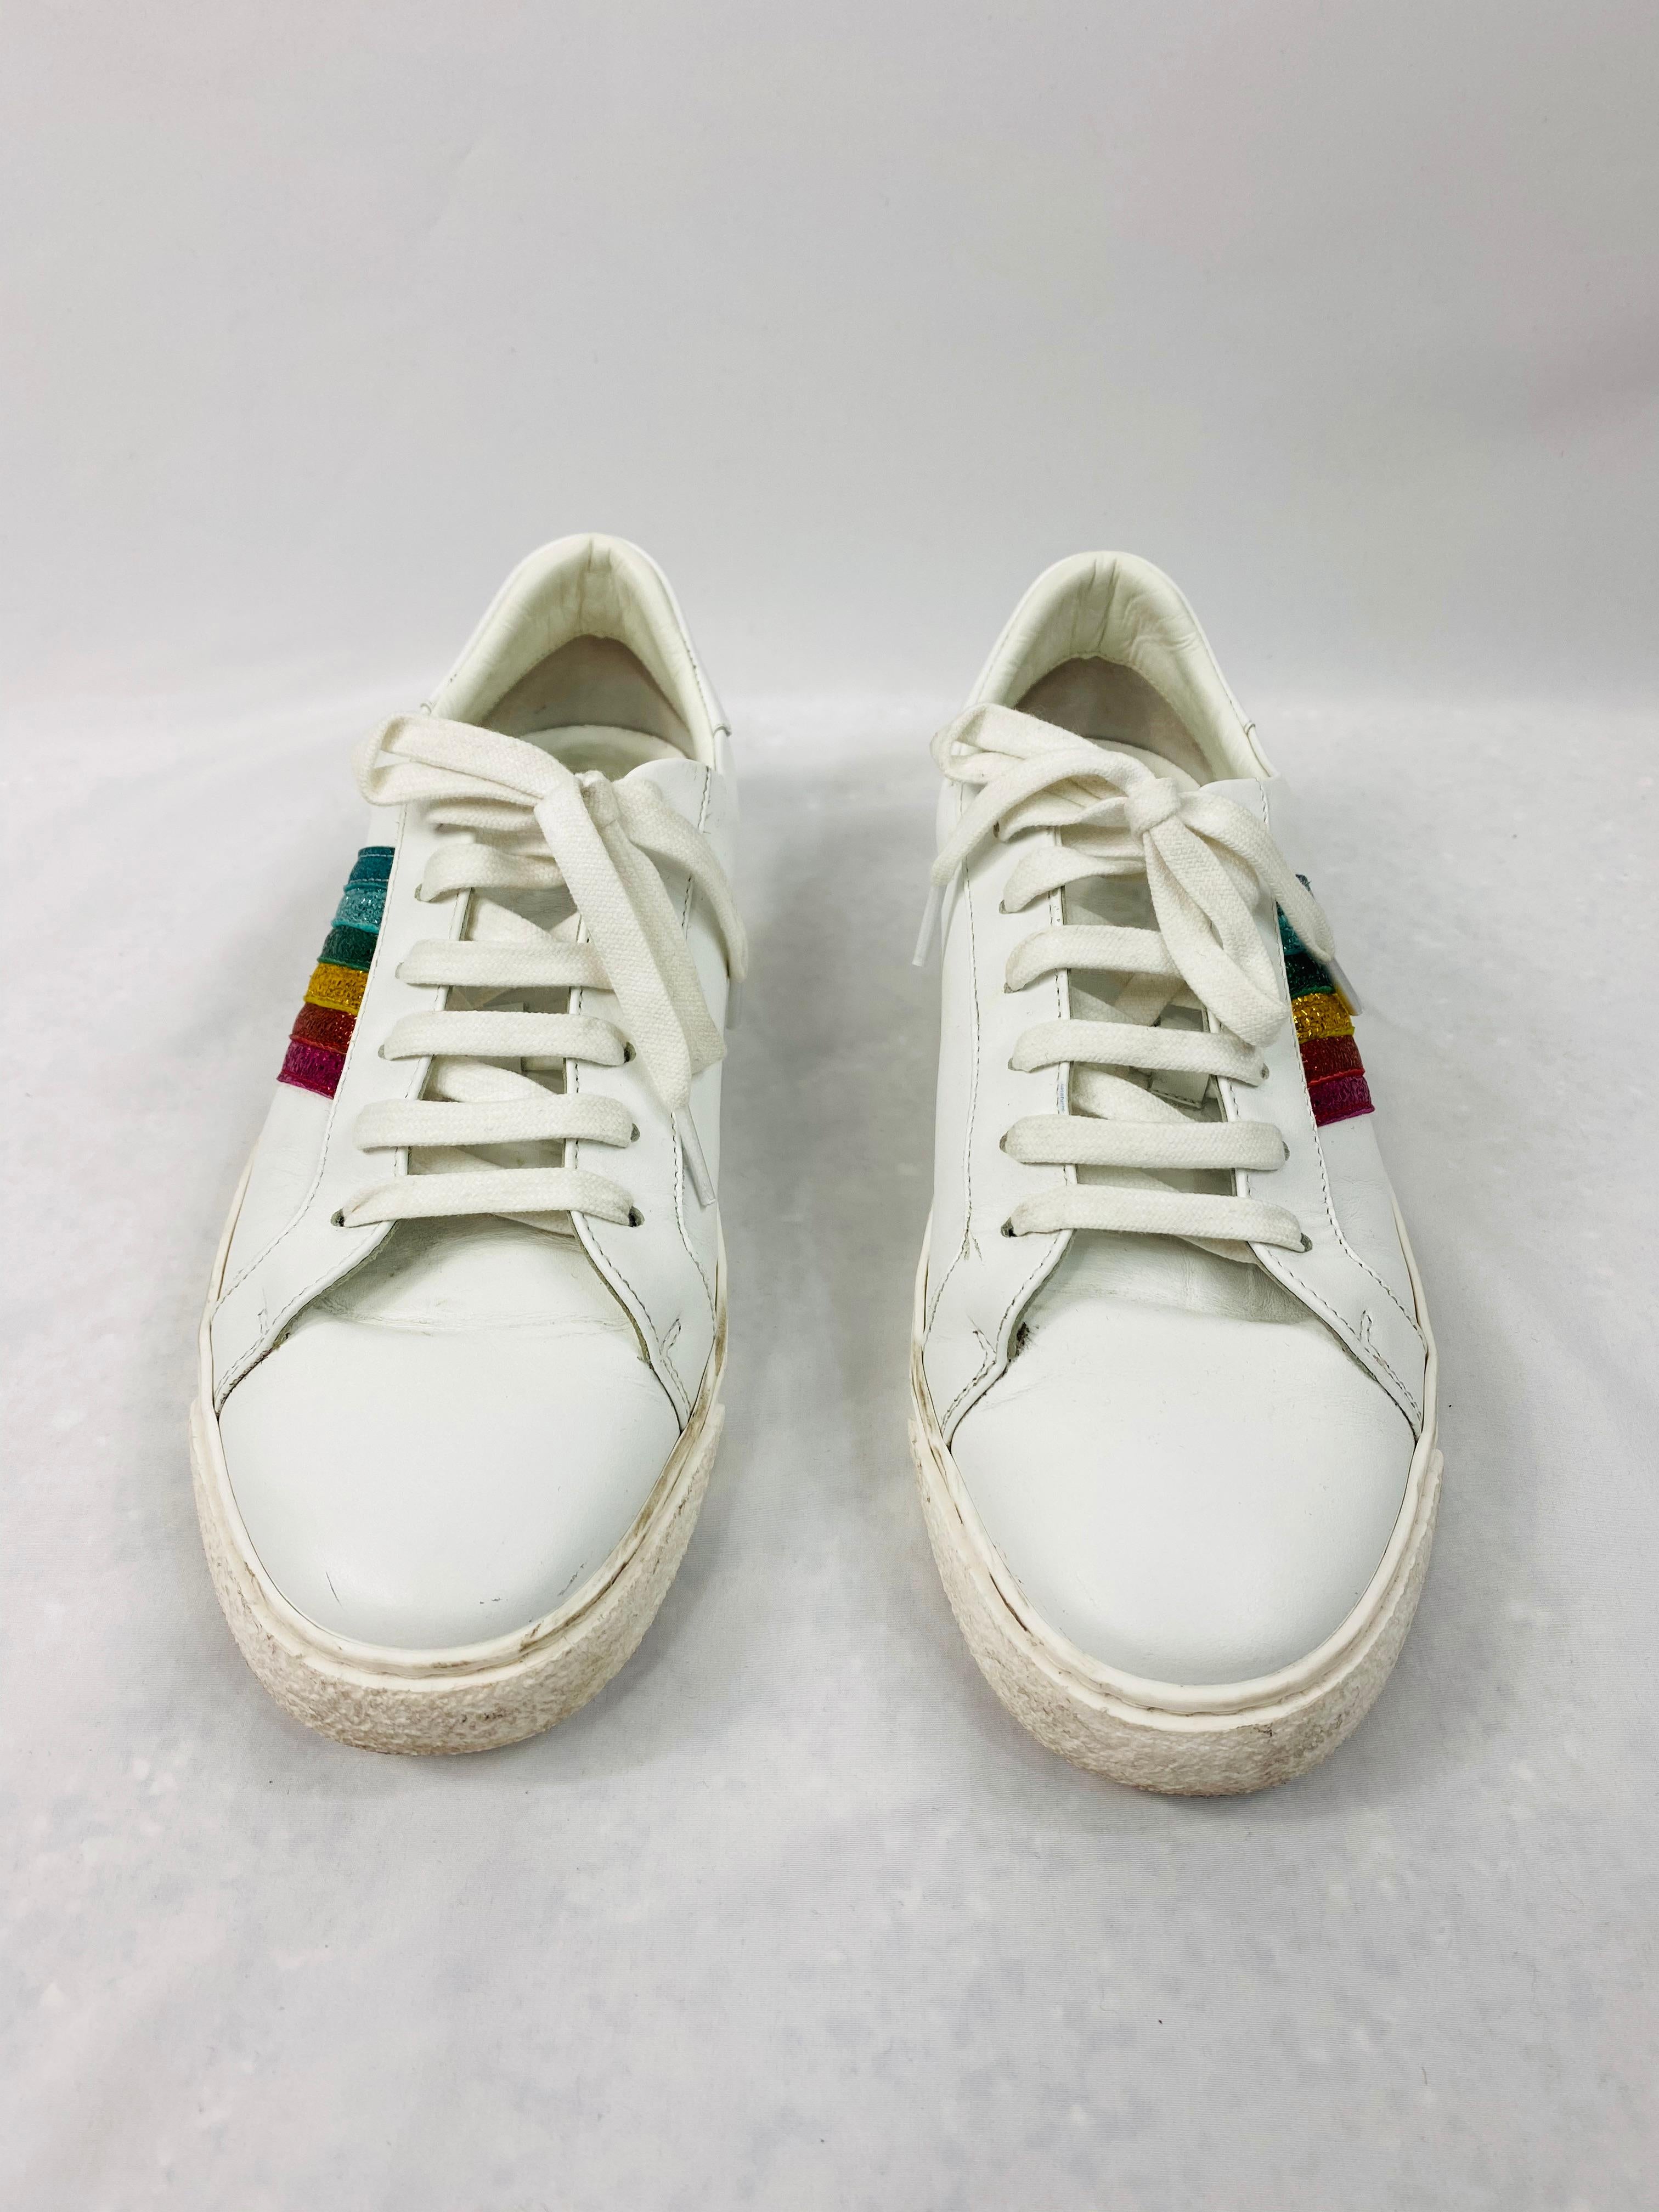 Anya Hindmarch White Leather Sneakers Size 39 For Sale 3